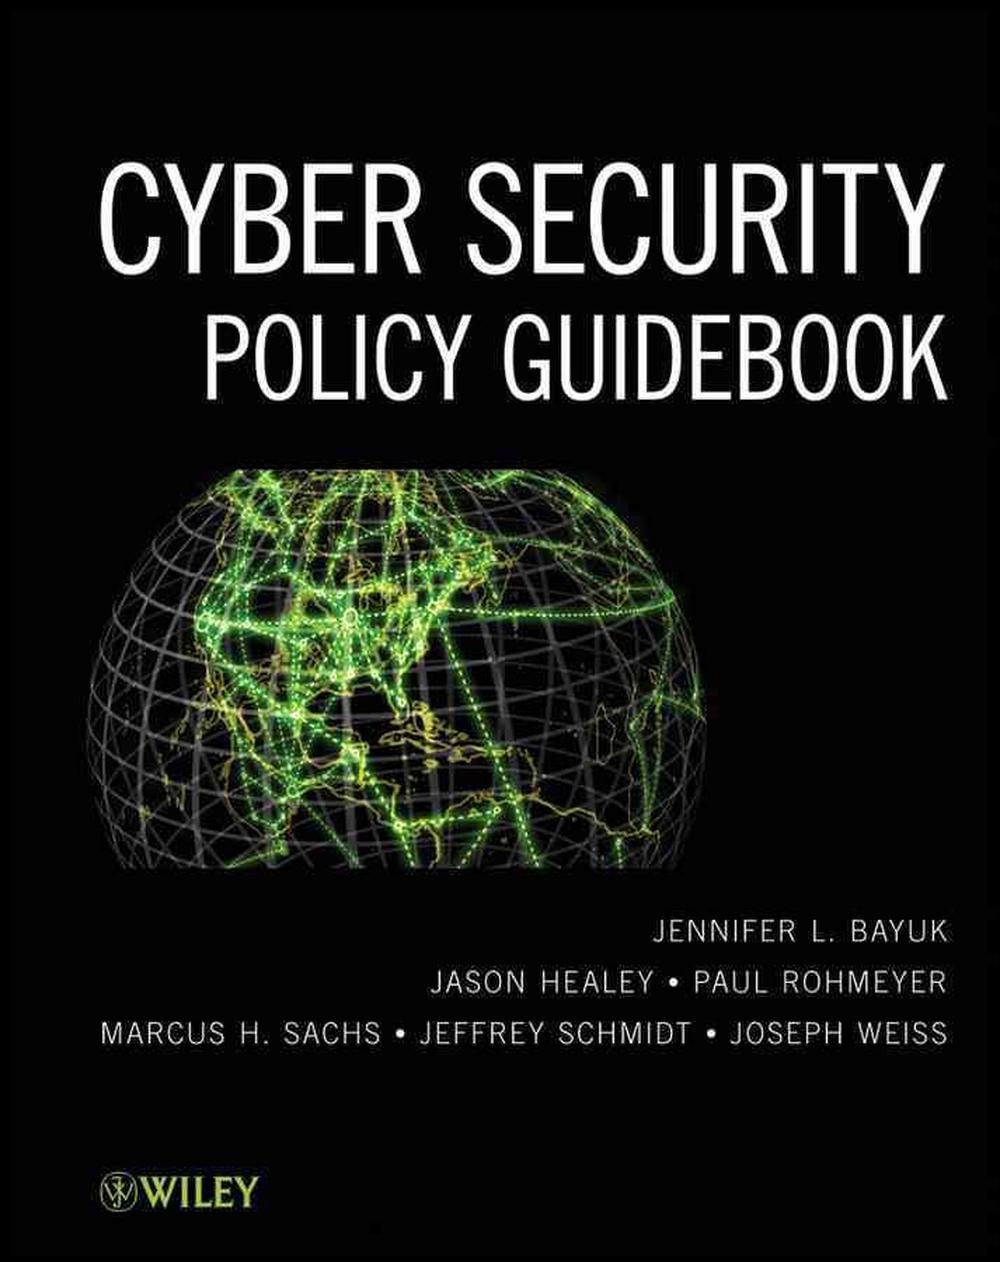 Cyber Security Policy Guidebook An Introduction By Jennifer L Bayuk